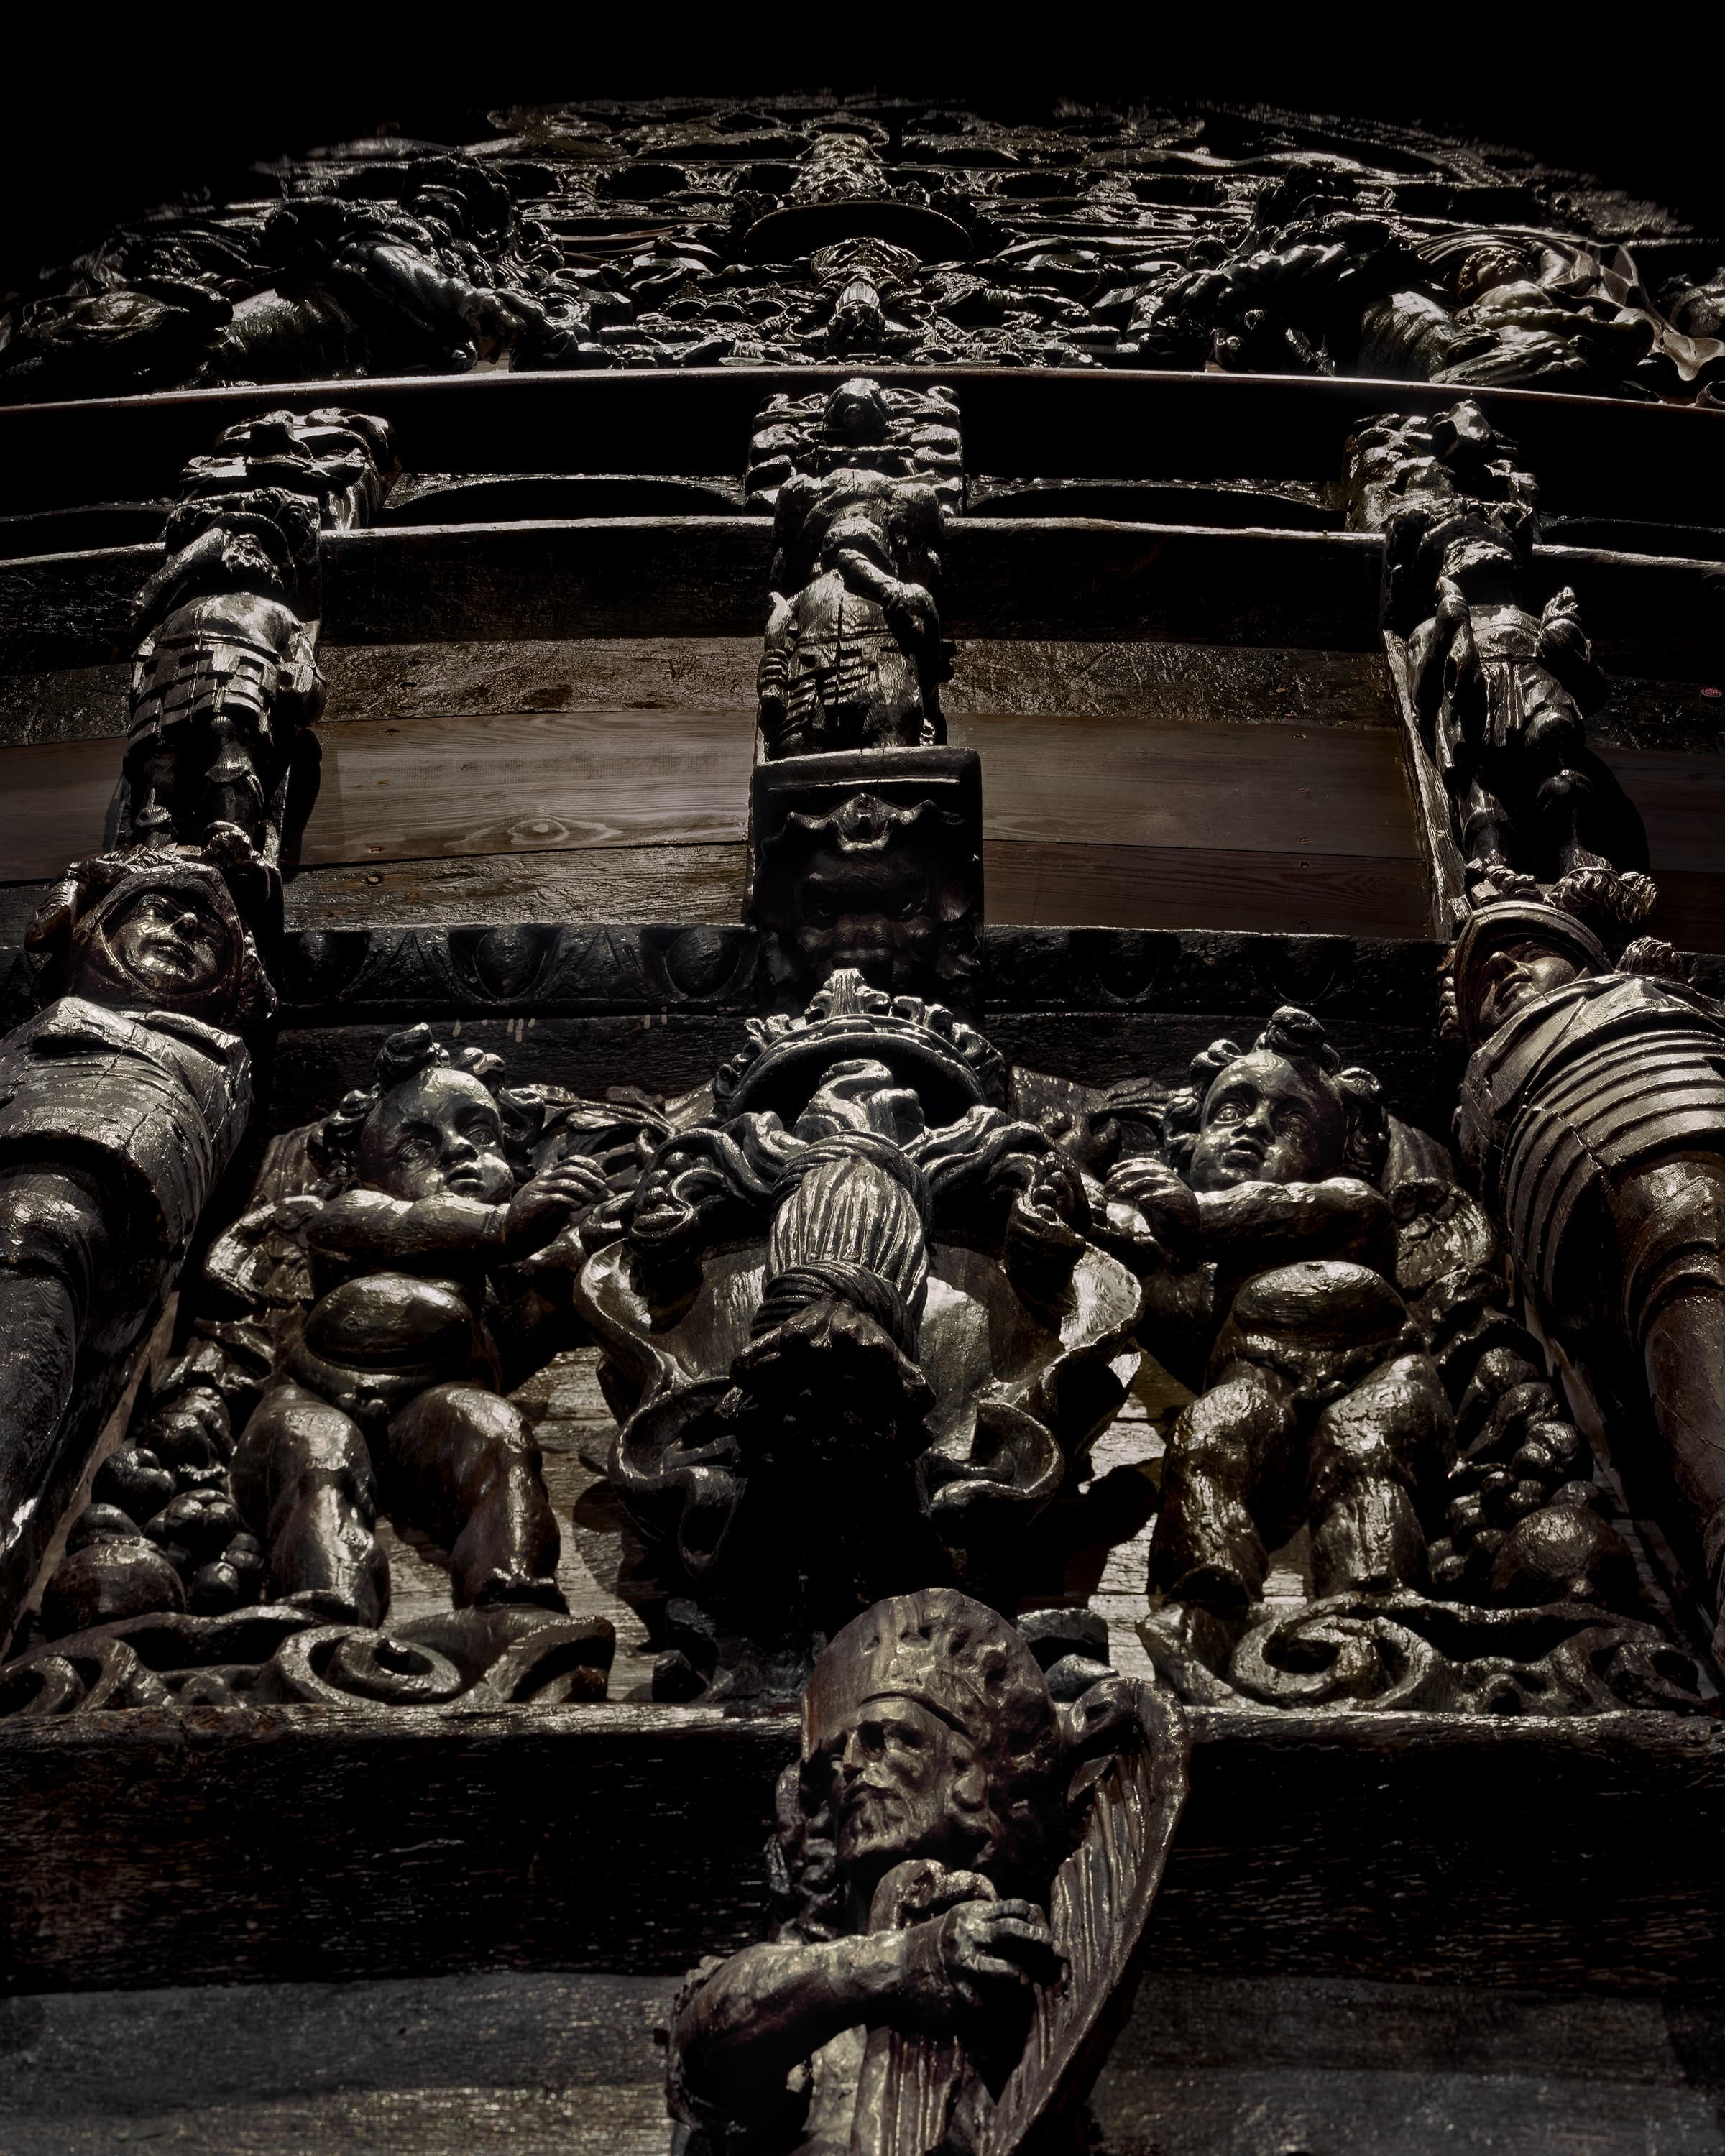 A view up the ornately carved stern of the Vasa, carvings of religious figures and soldiers.